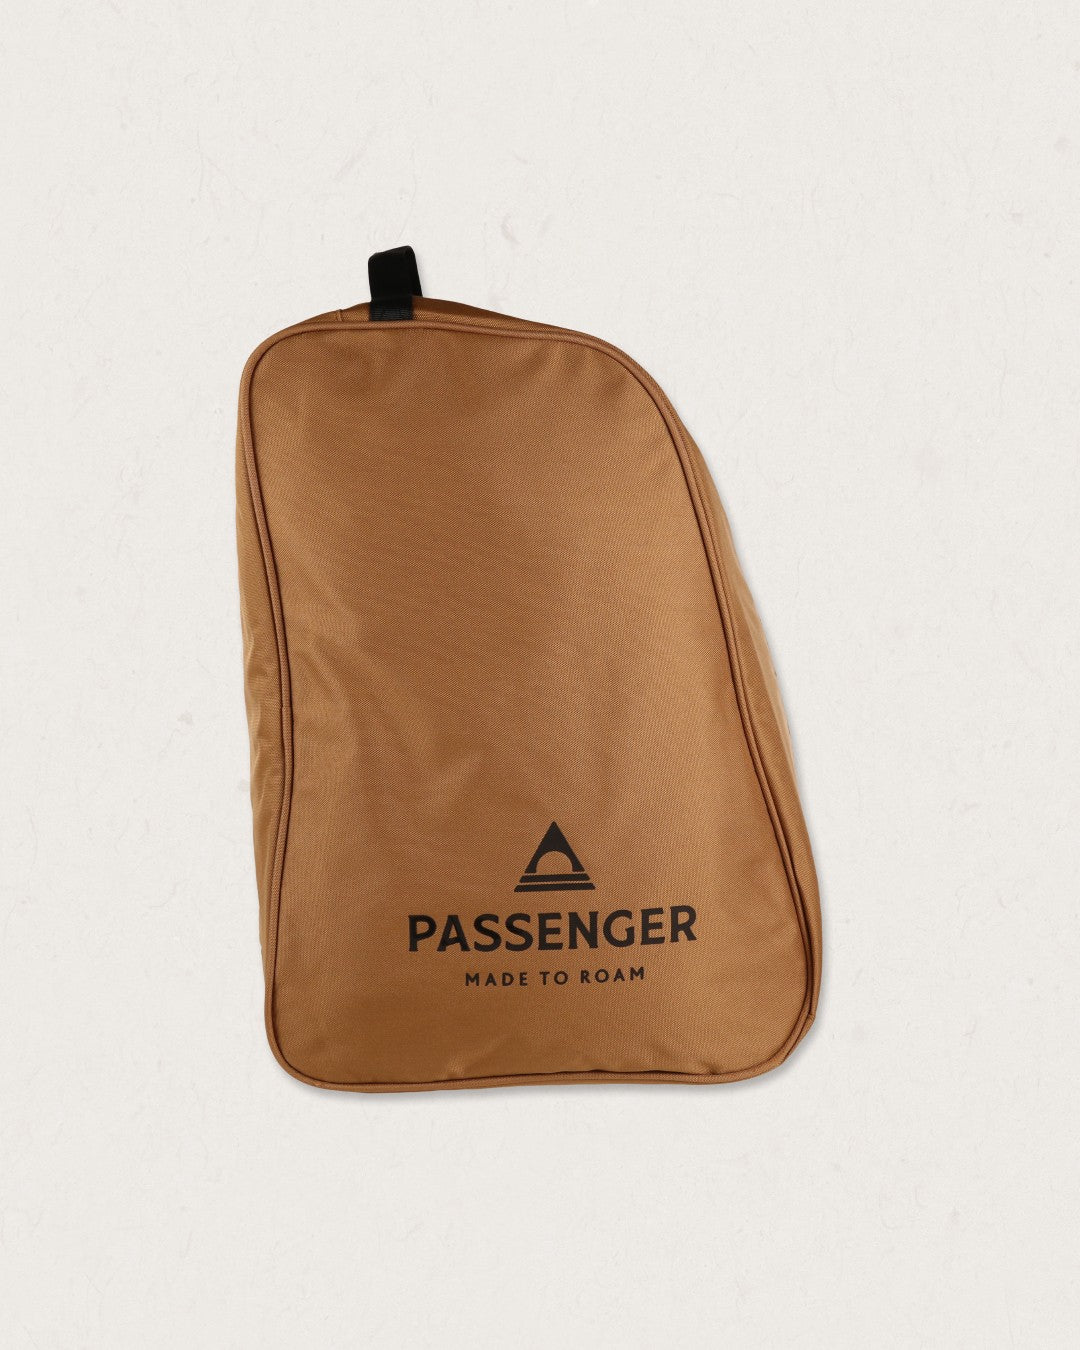 Explore Recycled Boot Bag - Golden Brown